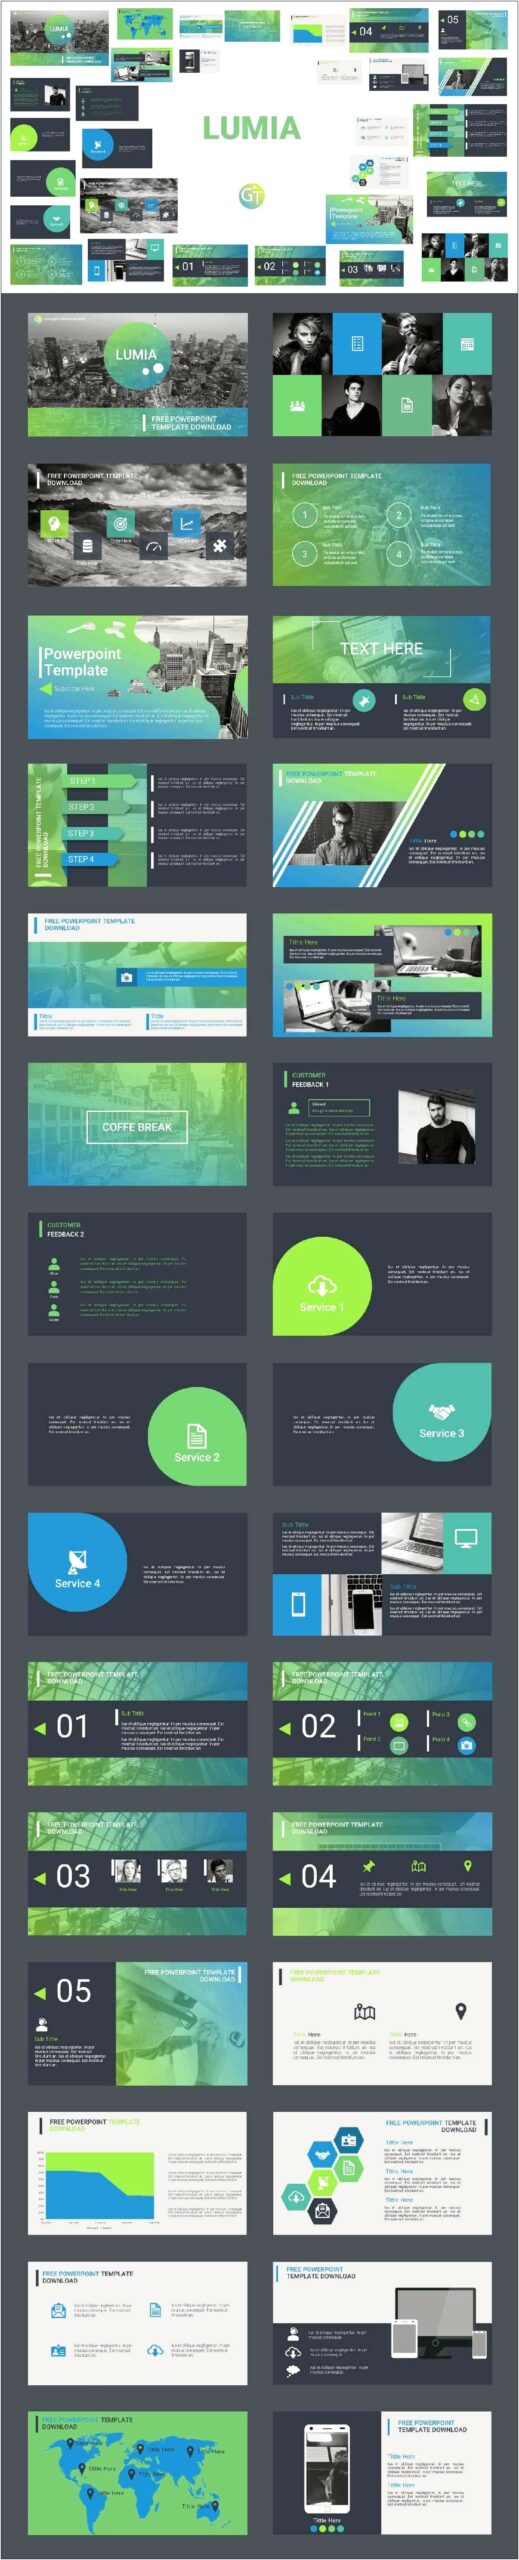 Best Powerpoint Templates 2014 Free Download